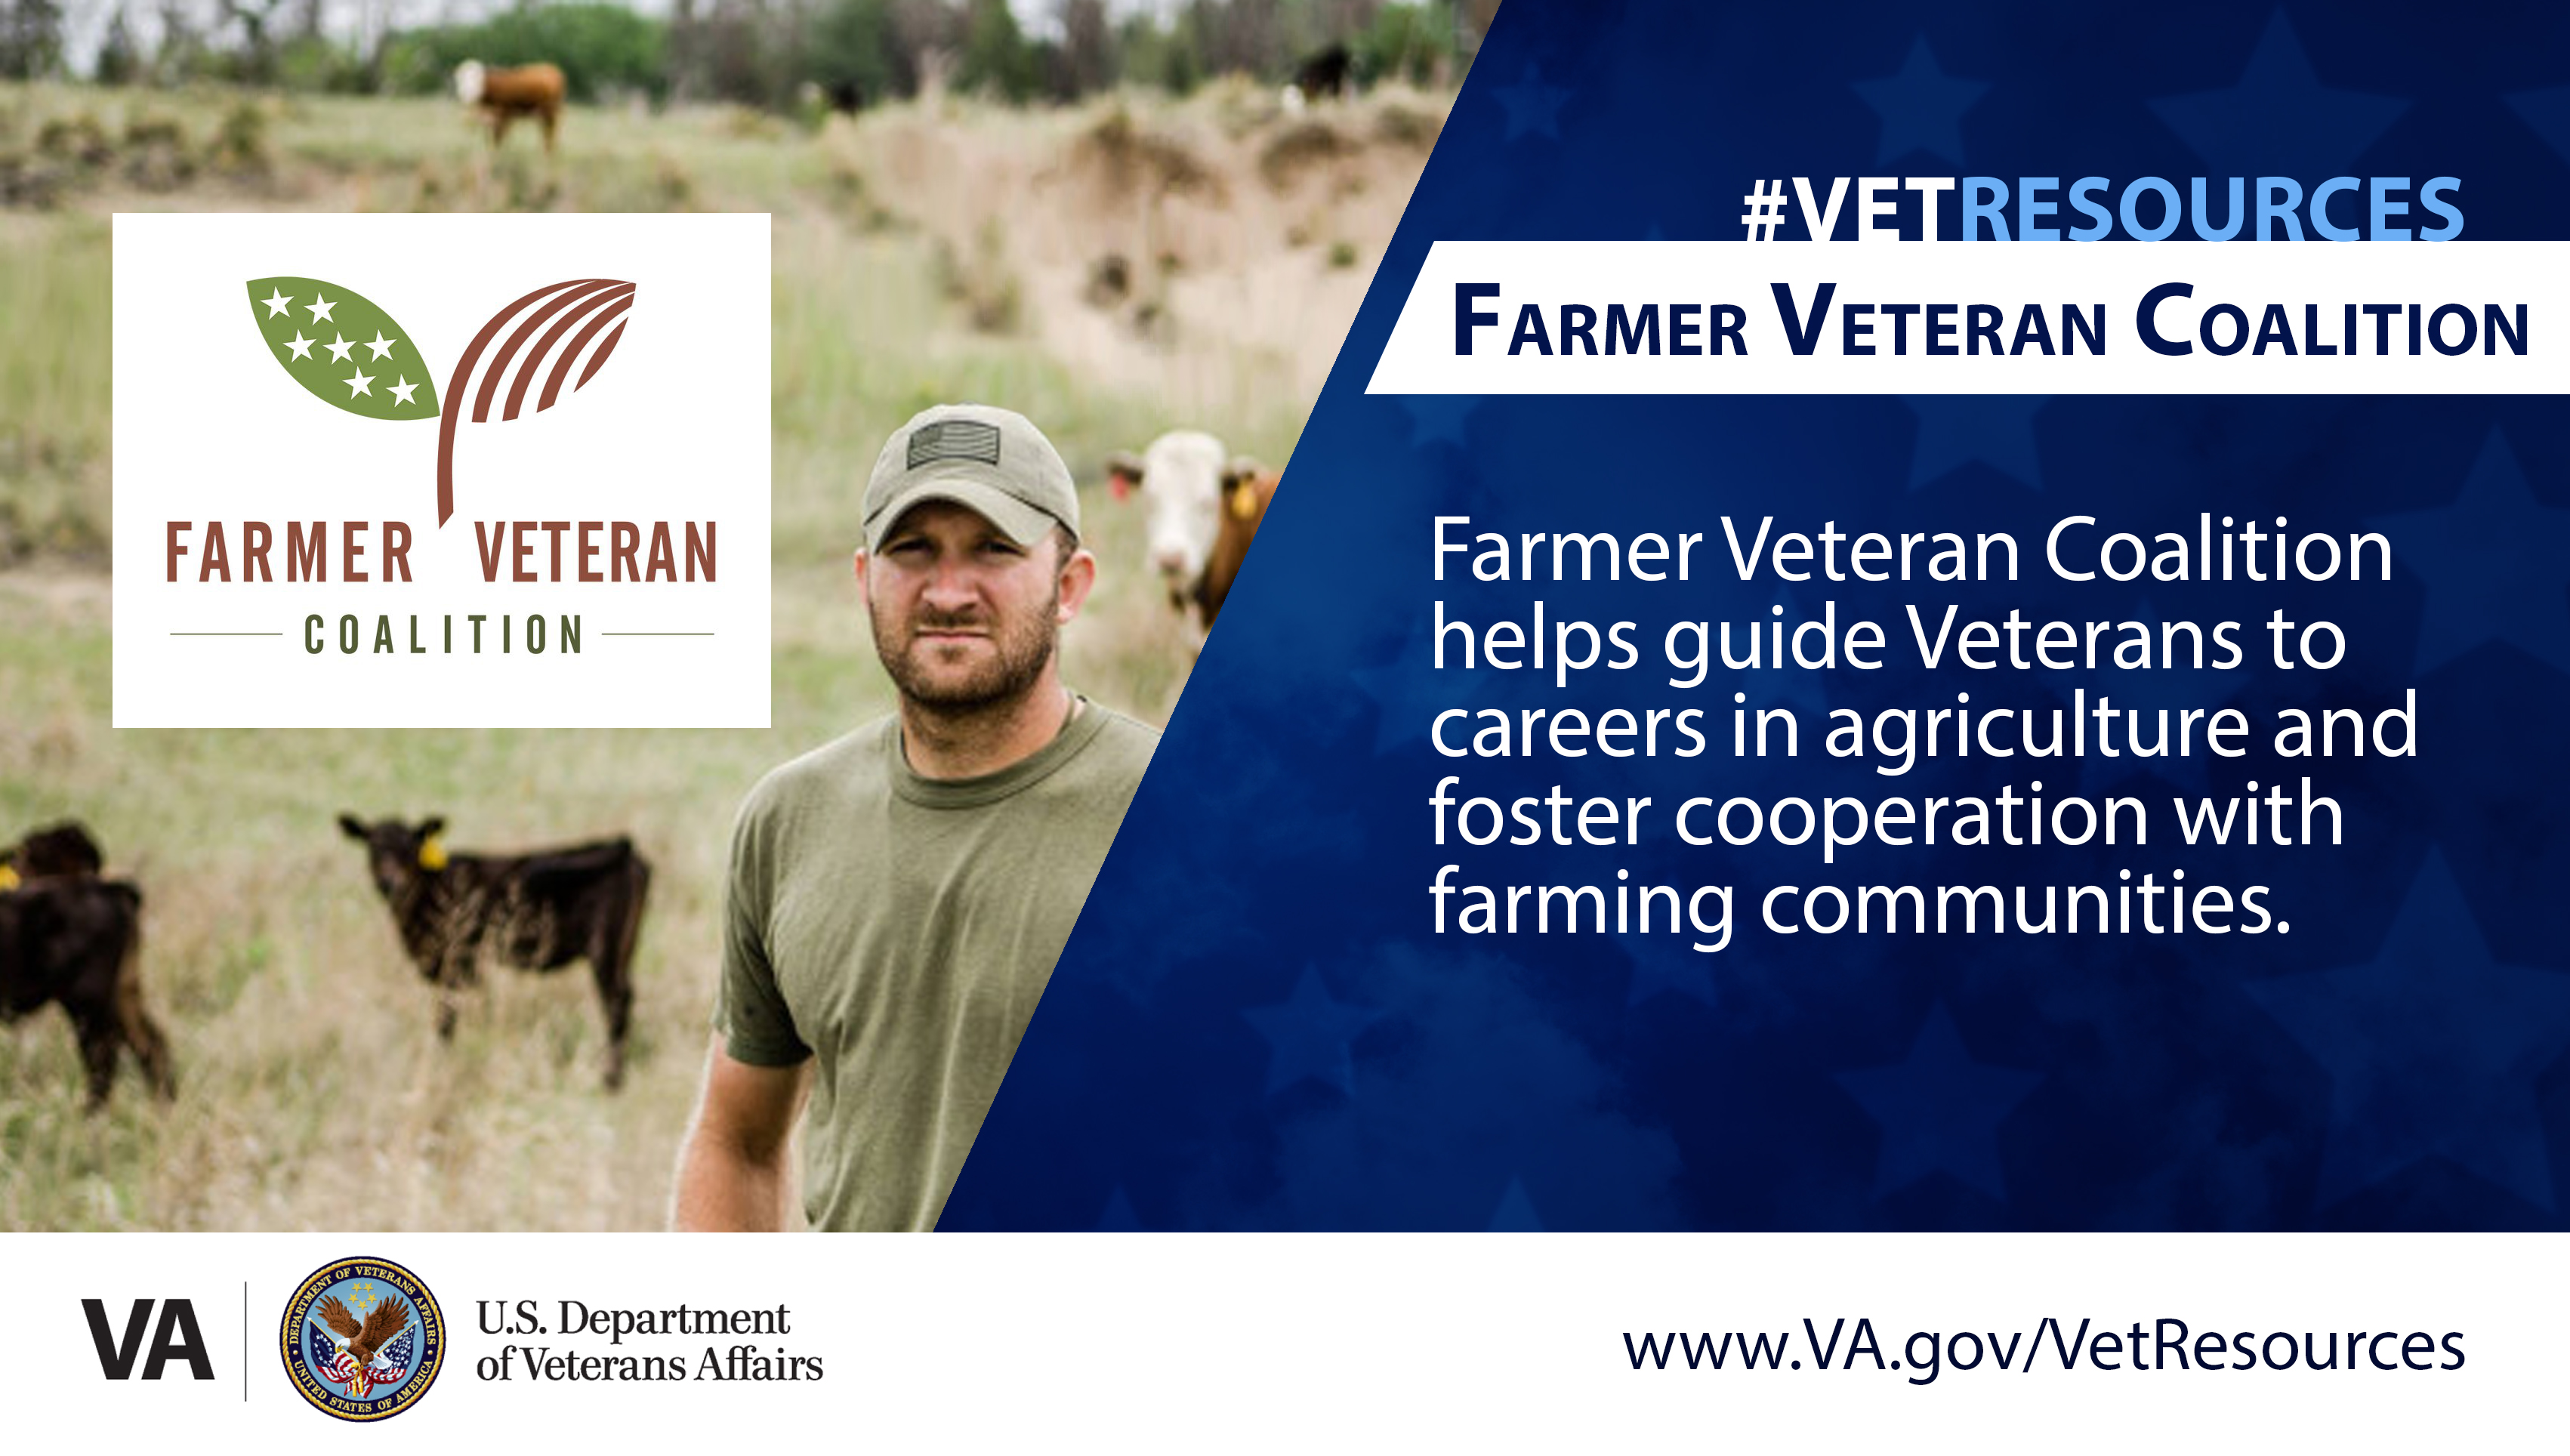 Farmer Veteran Coalition is a nationwide organization and the largest non-profit organization that guides Veterans to careers in agriculture.